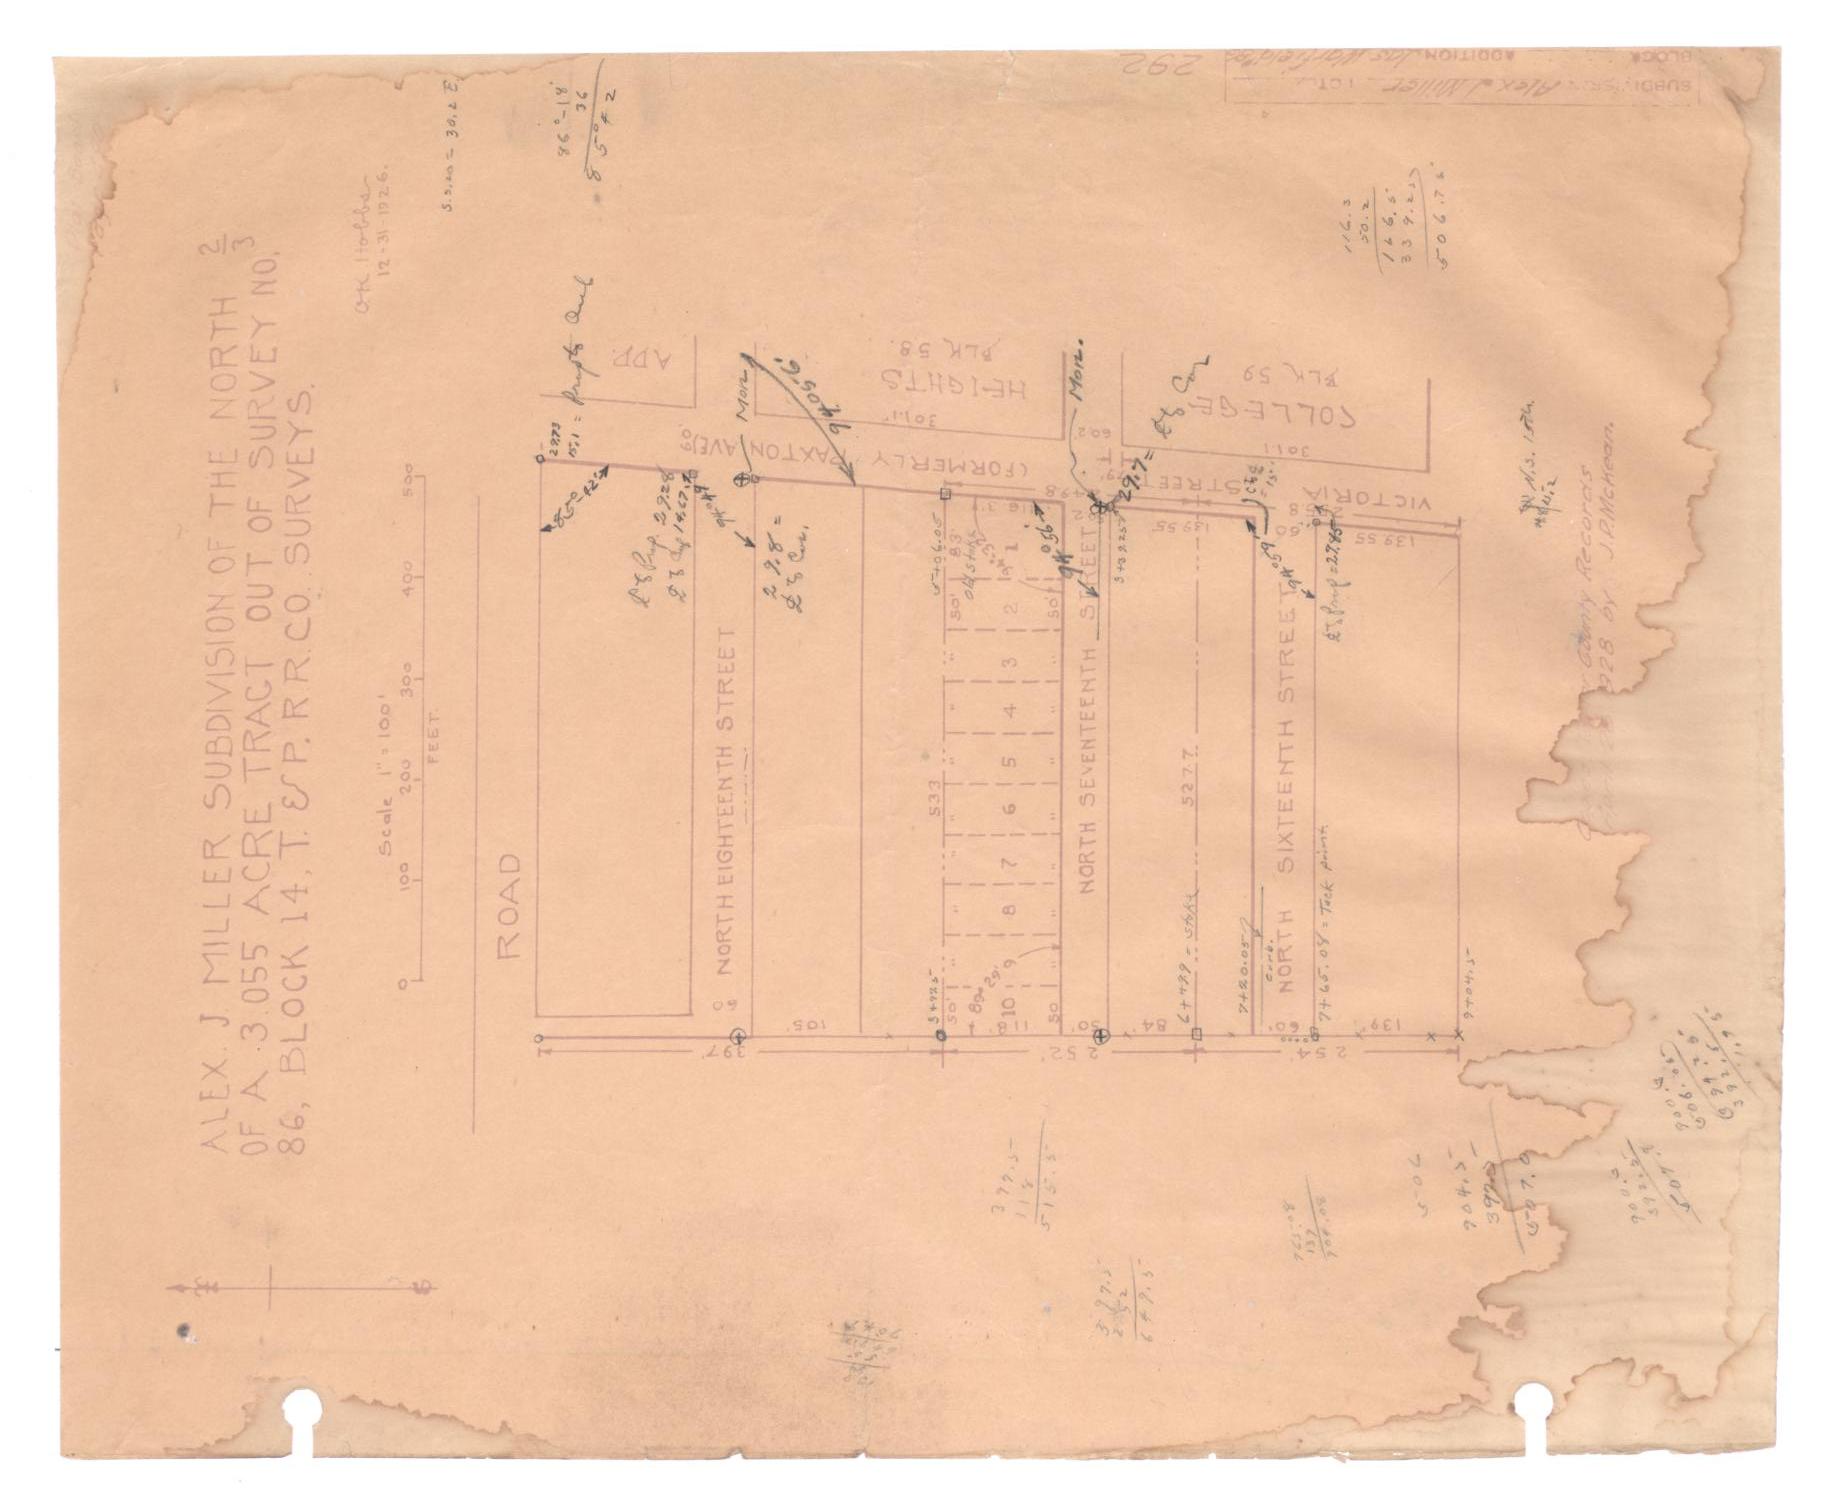 Alex J. Miller Subdivision of the North Two-Thirds of a 3.055 Acre Tract out of Survey Number 86, Block 14, Texas & Pacific Railroad Company Surveys [#3]
                                                
                                                    [Sequence #]: 1 of 2
                                                